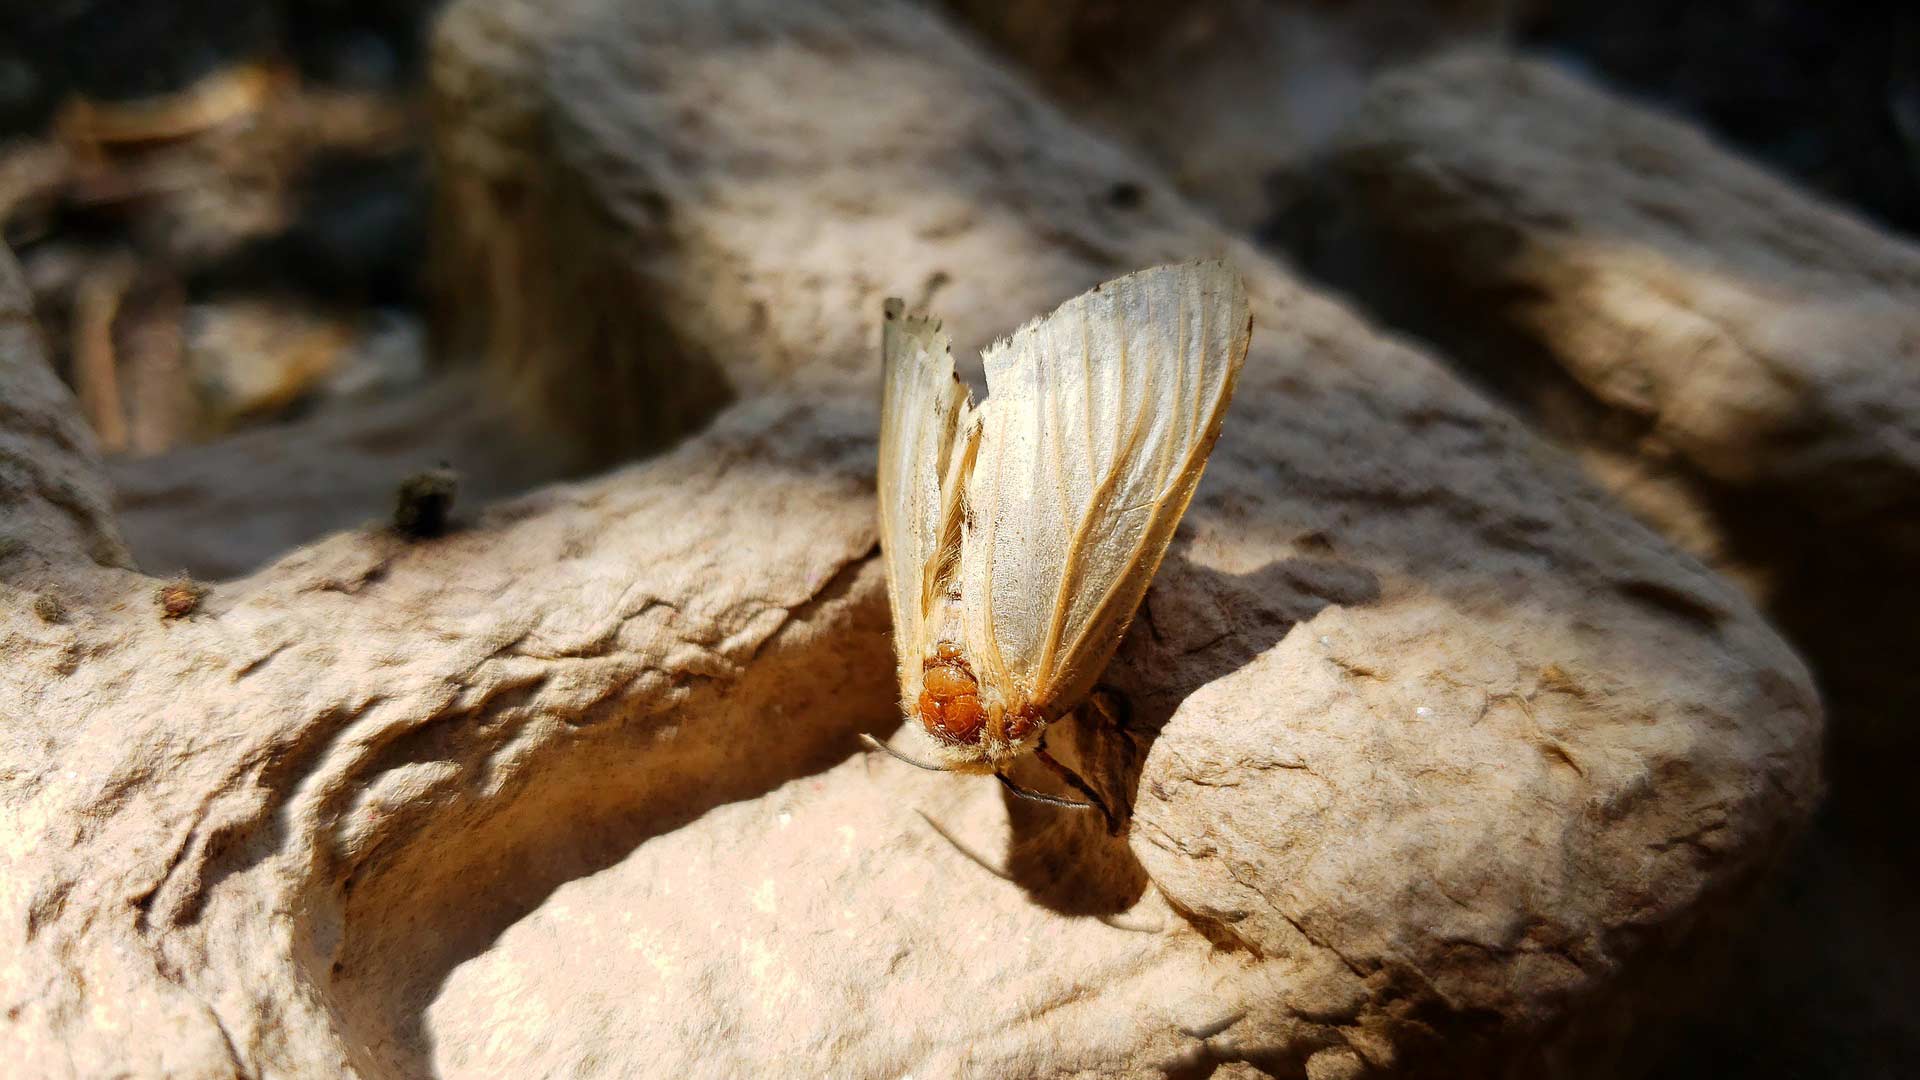 Spongy Moth Season Is Here in Michigan - Here’s What You Should Know